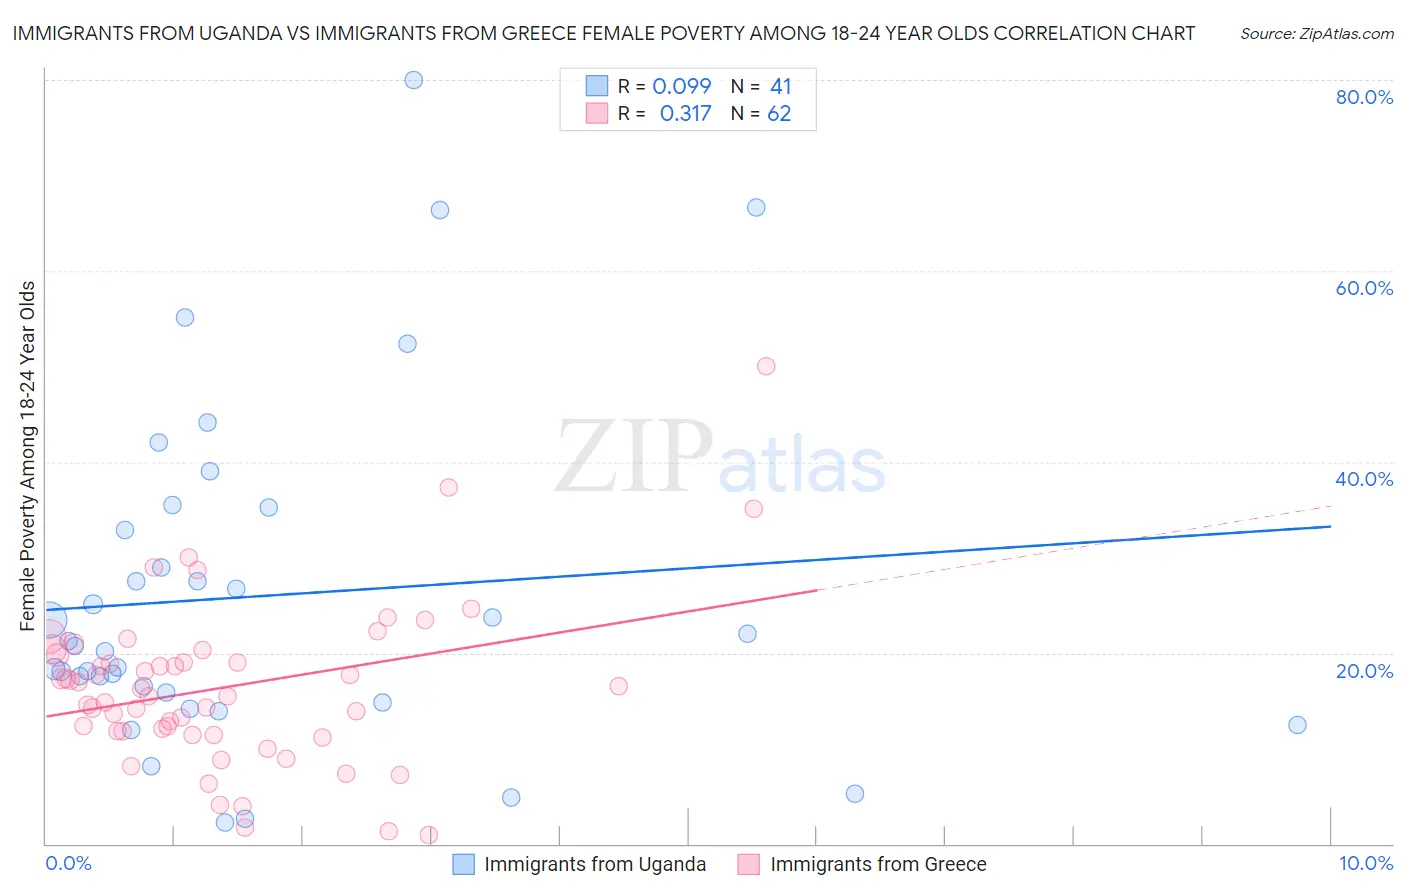 Immigrants from Uganda vs Immigrants from Greece Female Poverty Among 18-24 Year Olds